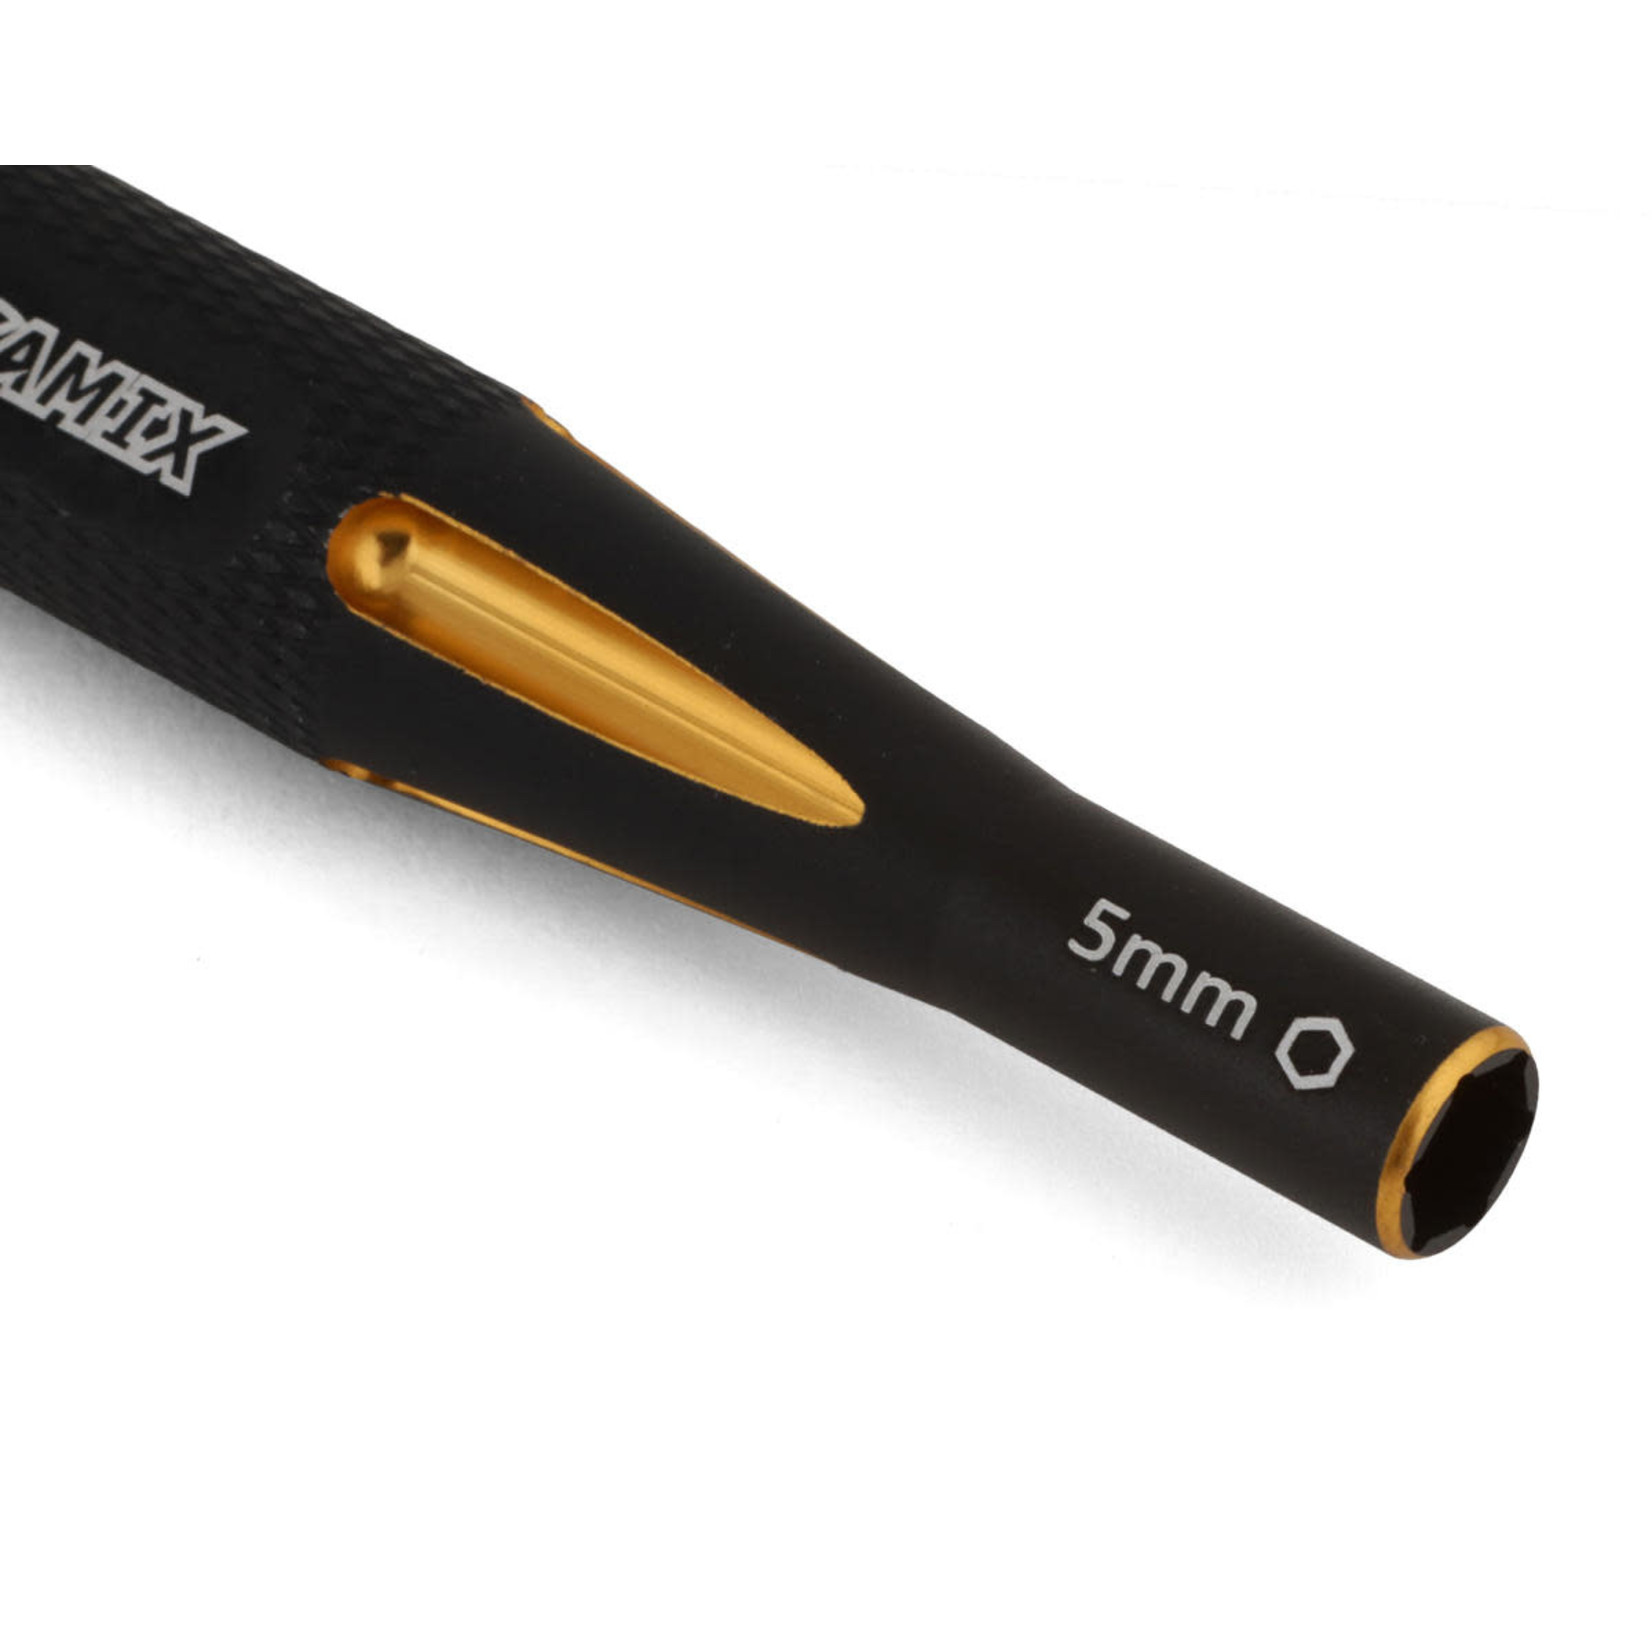 Samix Samix 2-in-1 Hex Wrench/Nut Driver For Traxxas TRX-4M (Gold) (1.5mm Hex/5mm Nut) #TRX4M-SD15